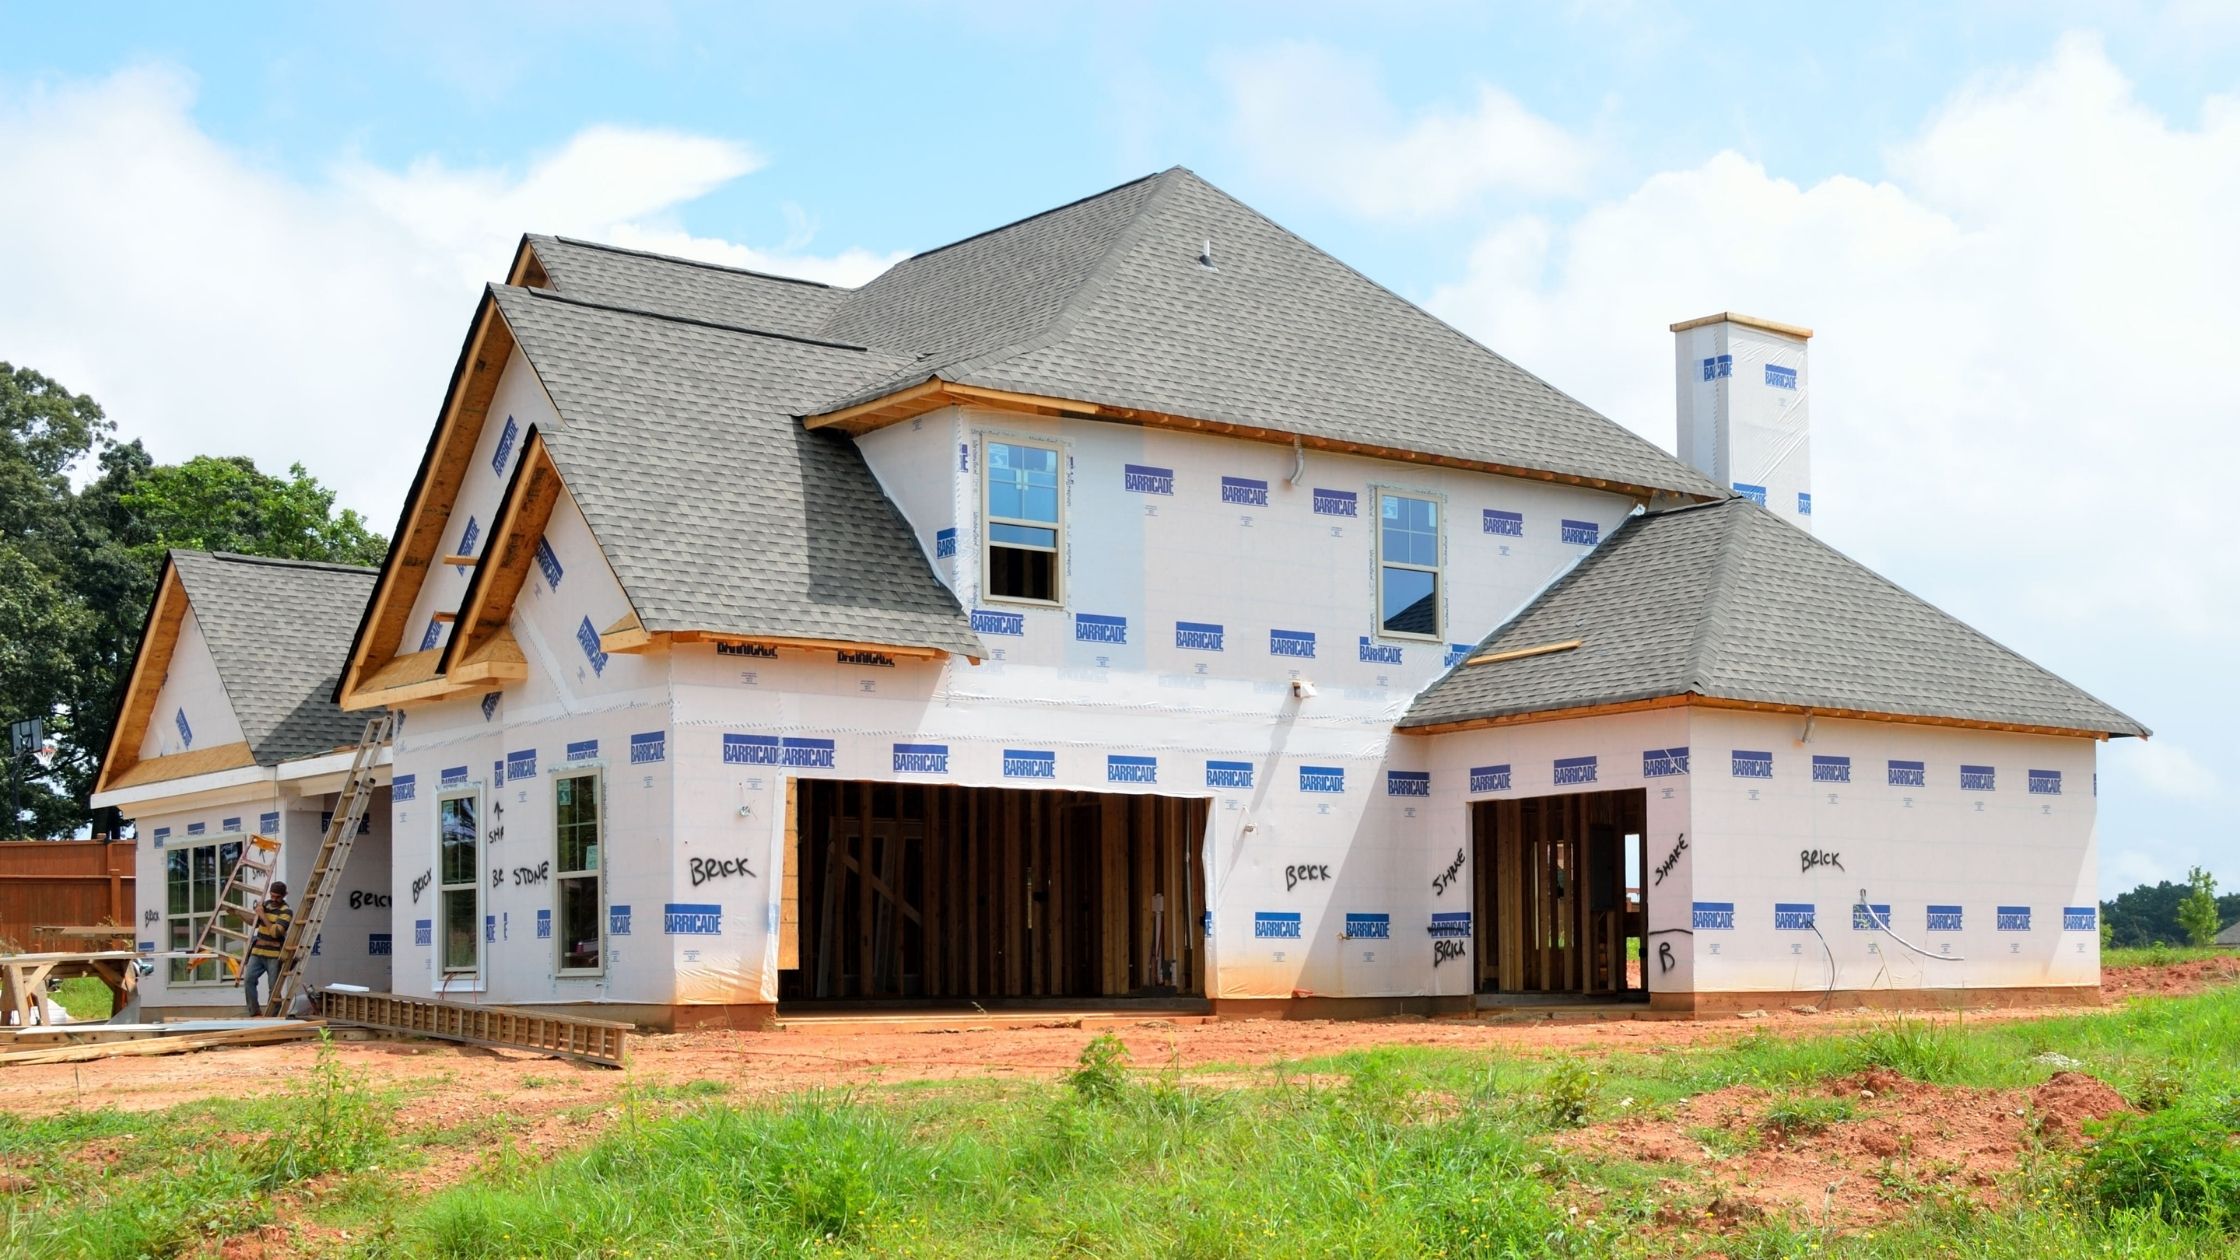 Building a Home? Here’s What You Need to Know to Get Home Insurance in Florida